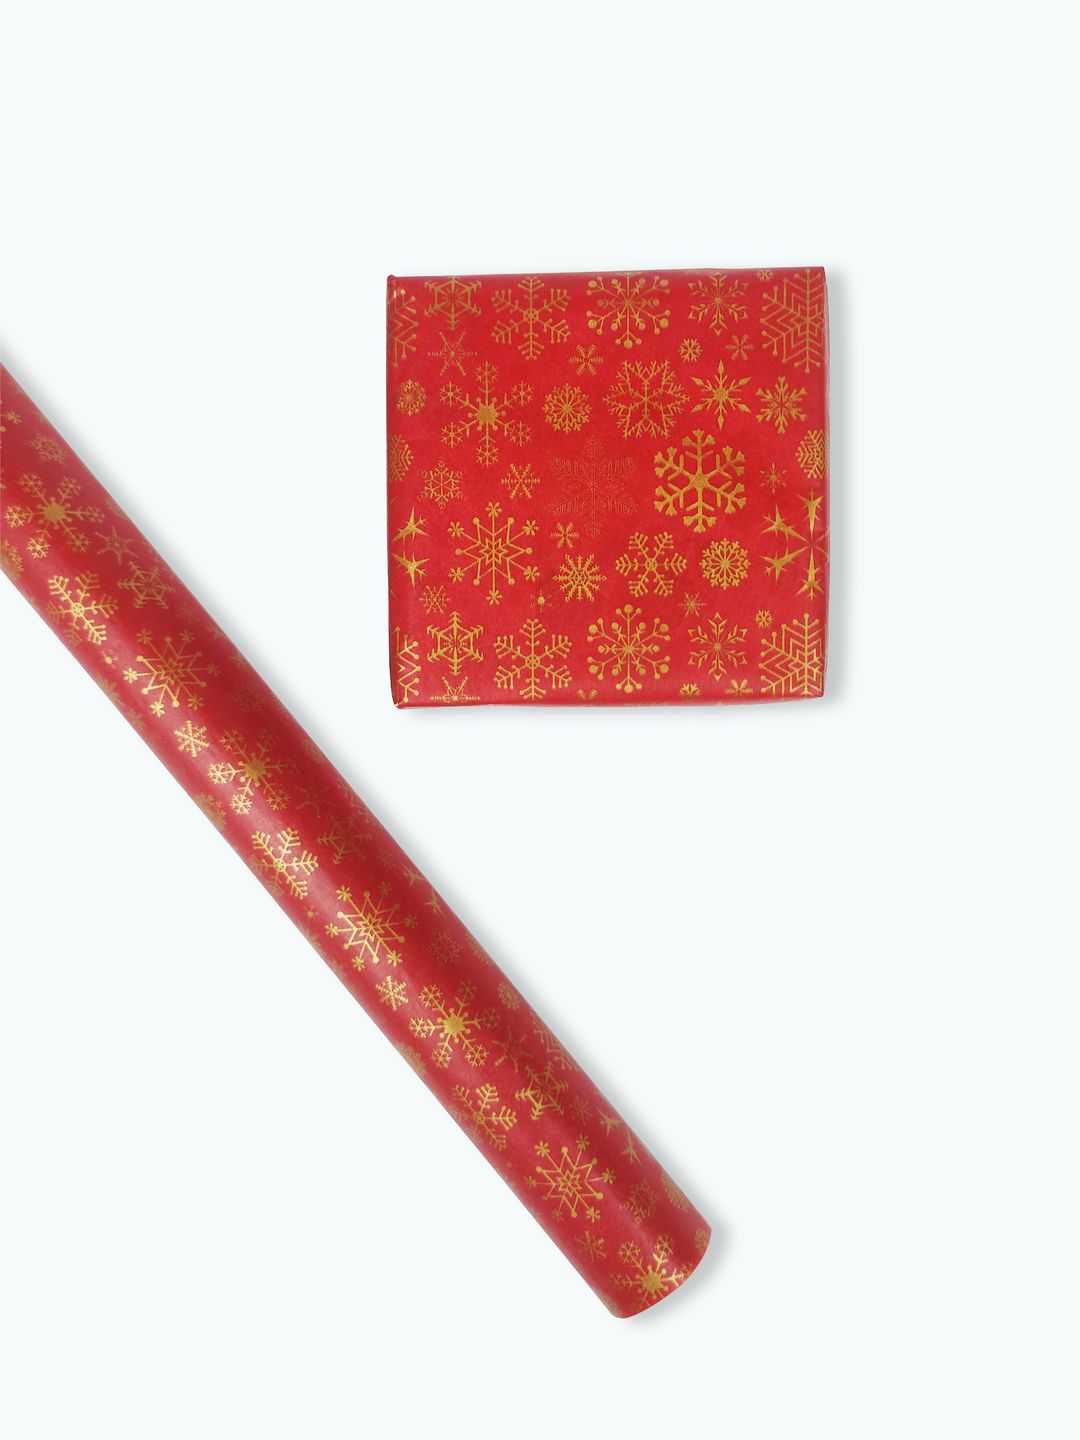 wrapping paper | tissue paper | custom wrapping paper | custom tissue paper | coloured tissue paper | tissue paper roll | design tissue paper | eco friendly tissue paper | compostable tissue paper | printed tissue paper